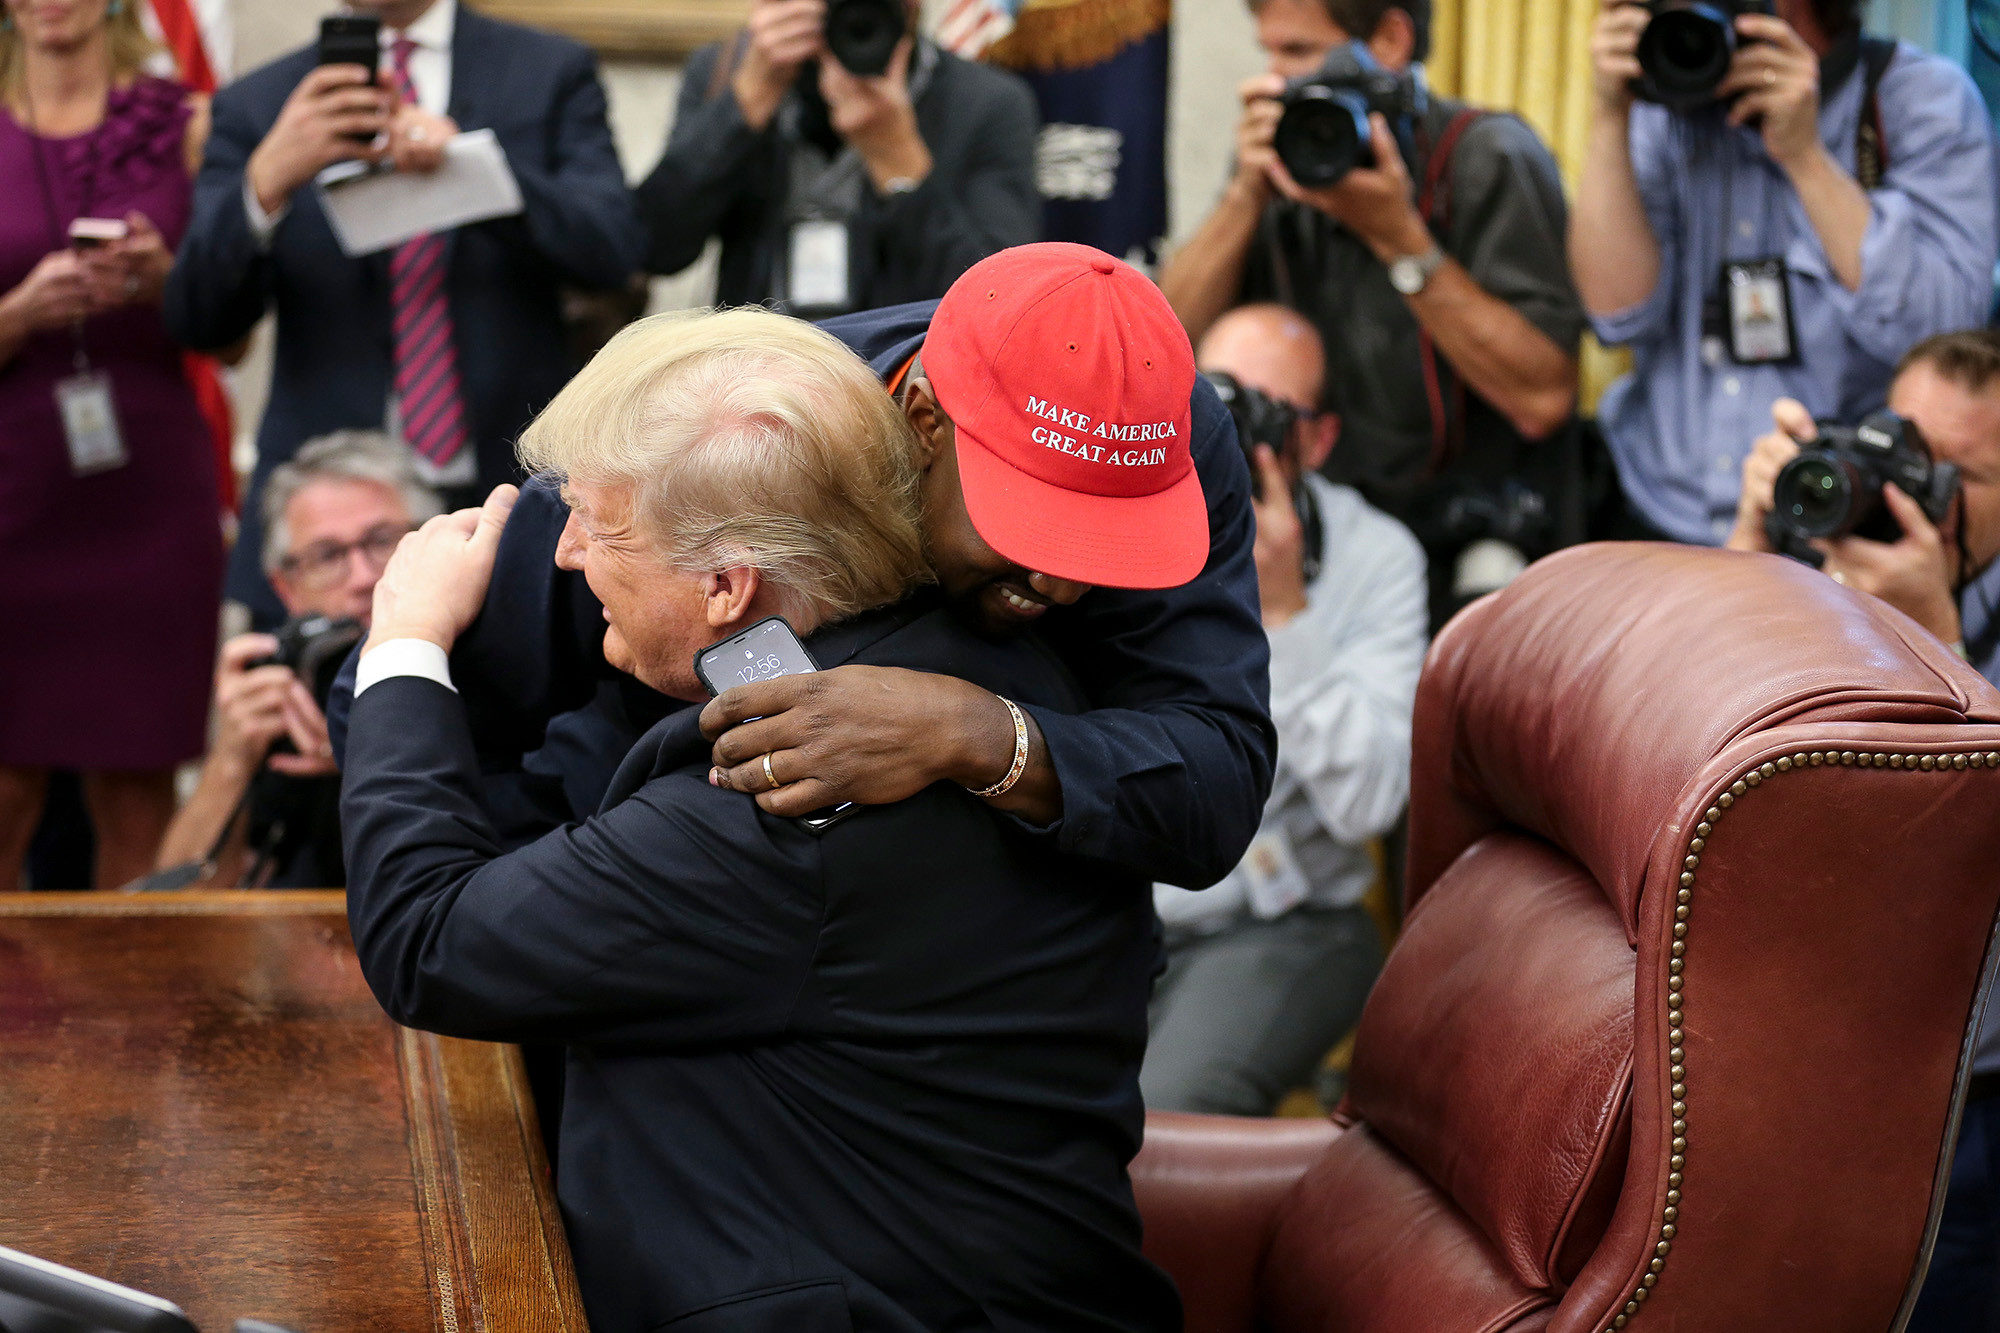 Trump and Kanye West